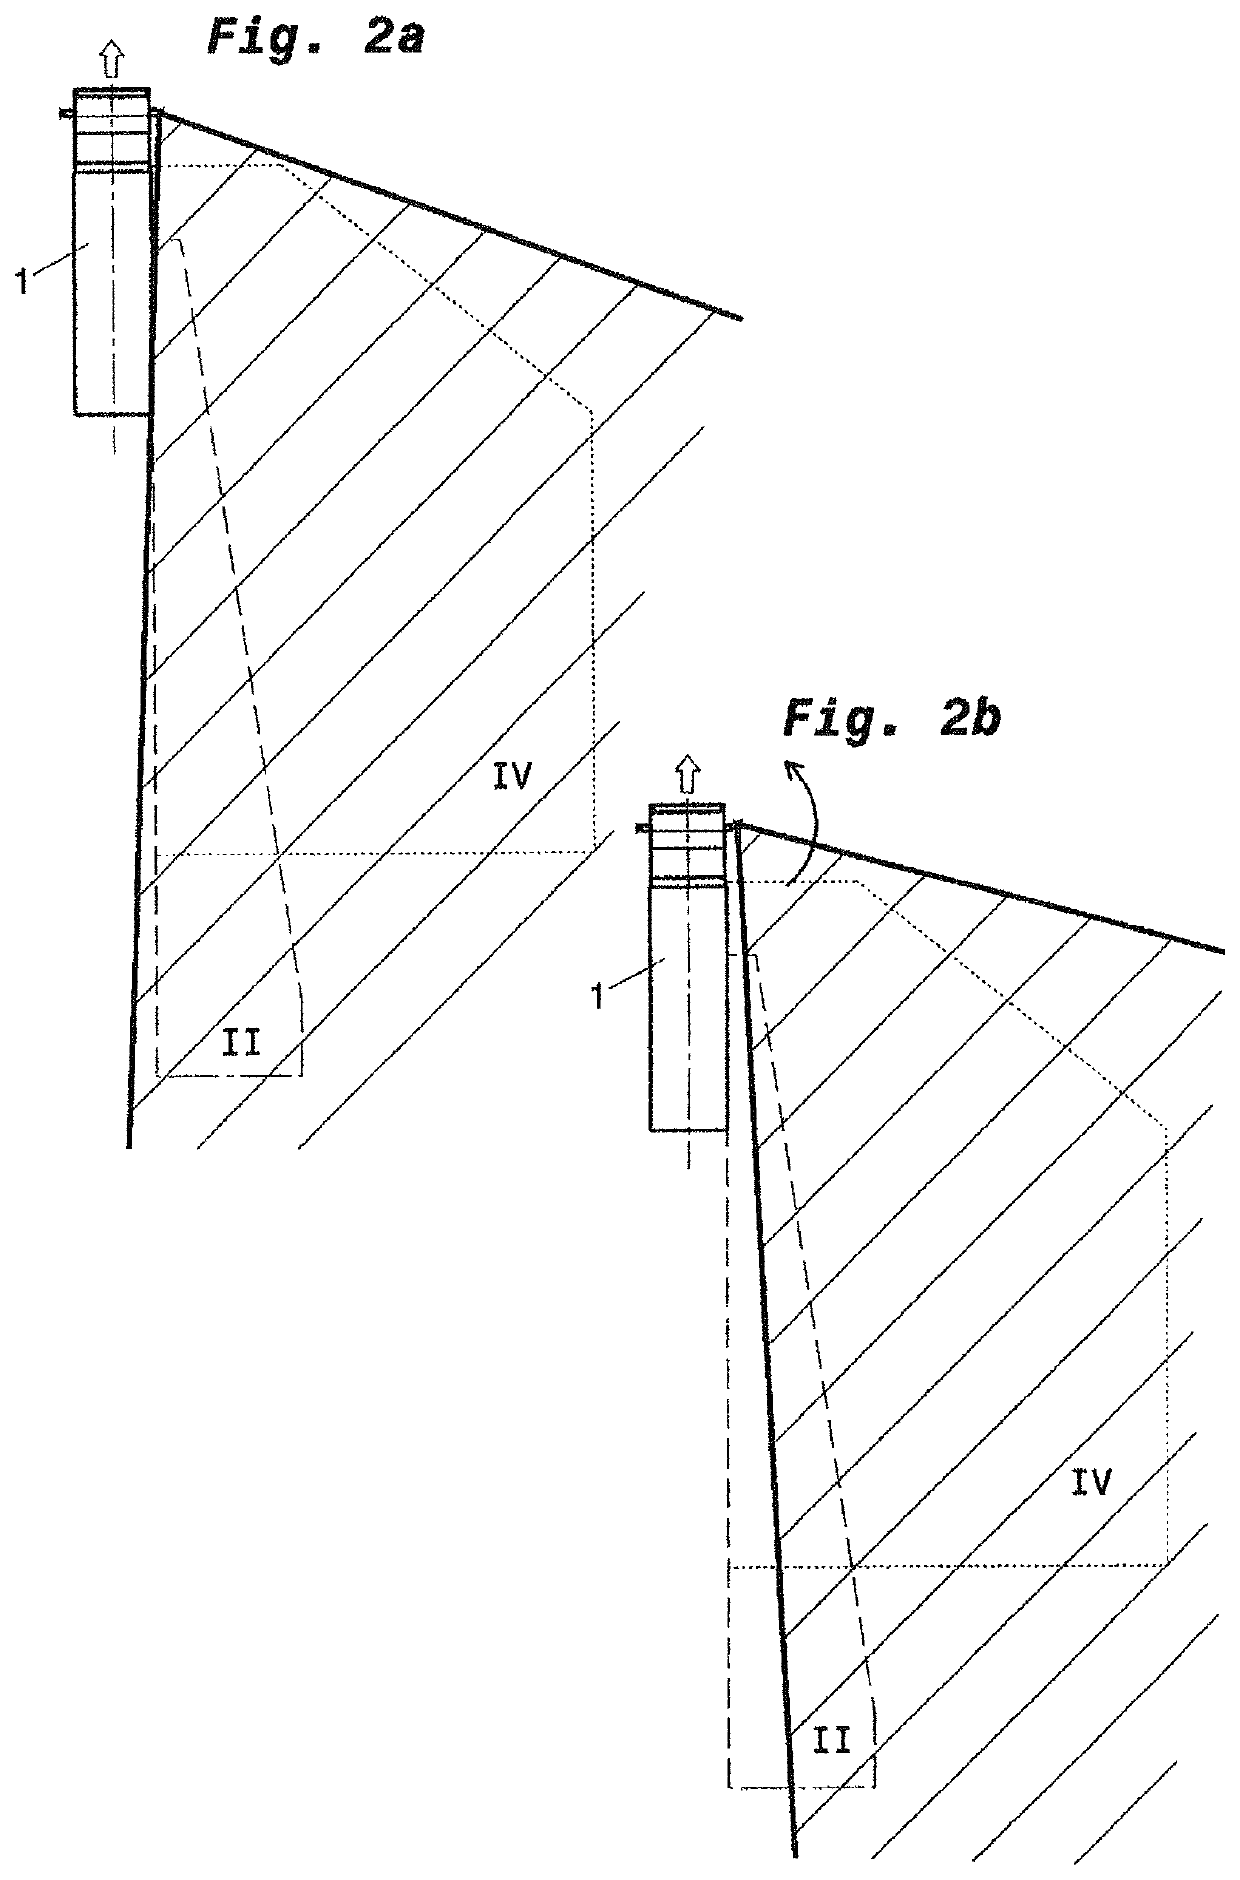 Holding apparatus for a vehicle